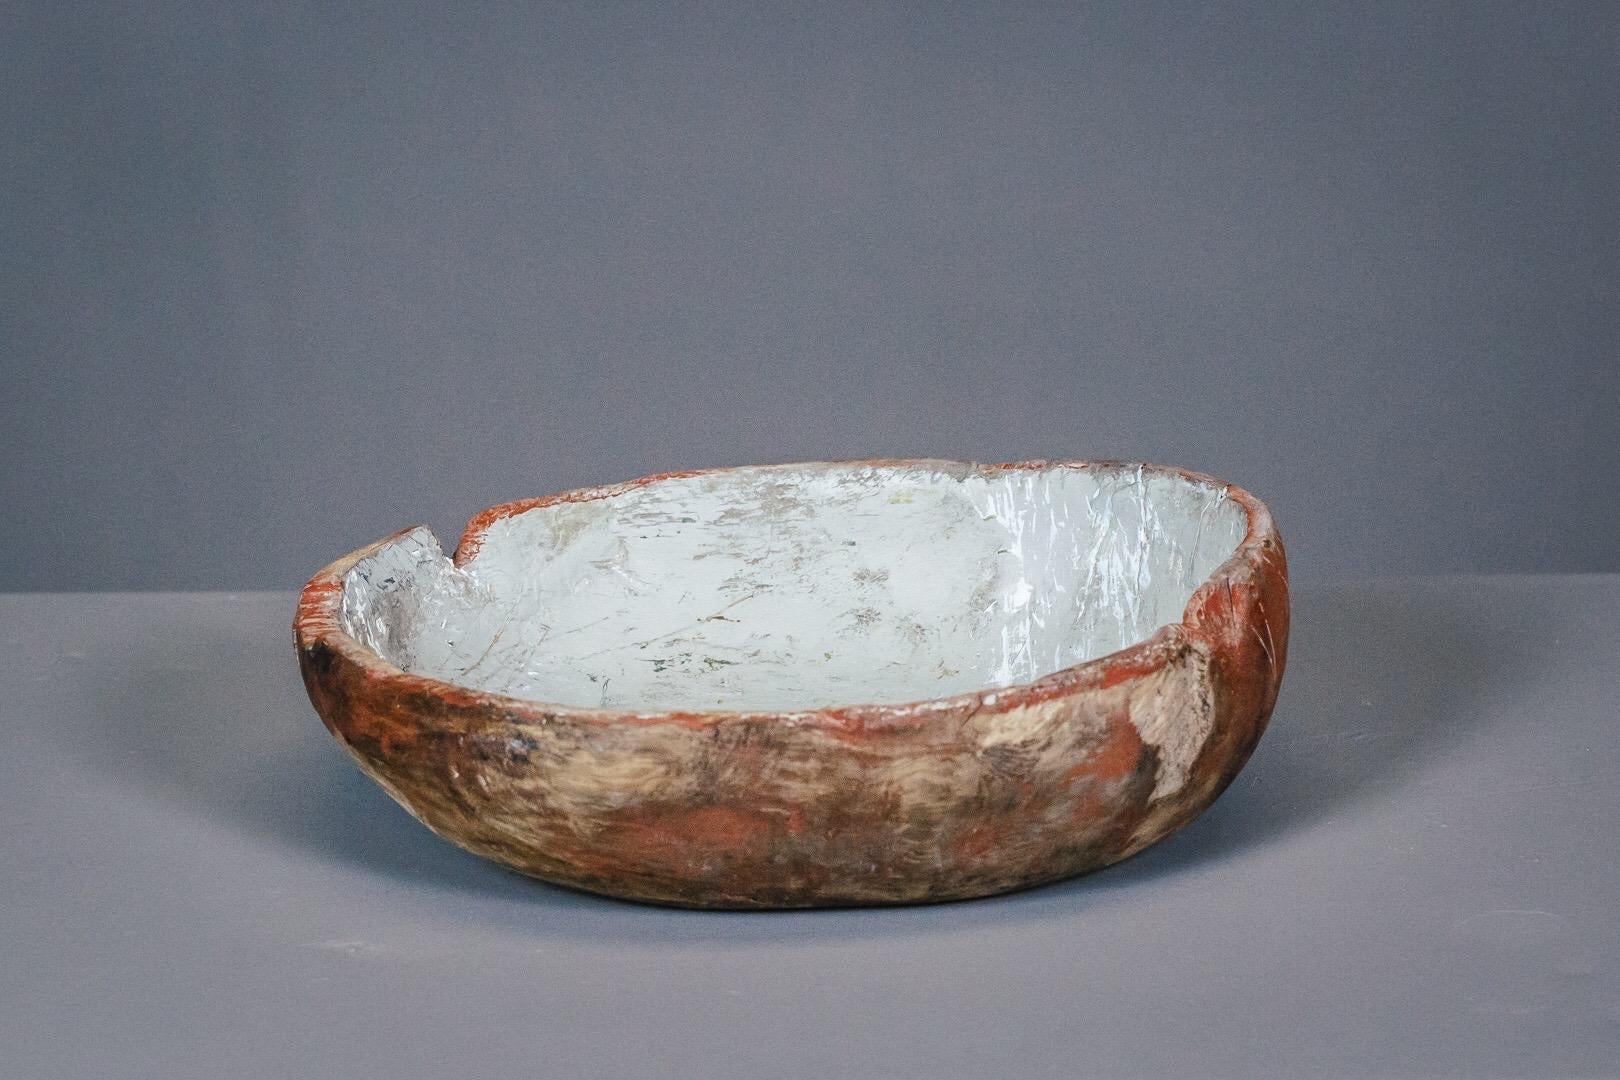 Painted root or knot bowl, original exterior paint, with later paint to the interior, used most recently in an artist studio, wonderful textured surface.